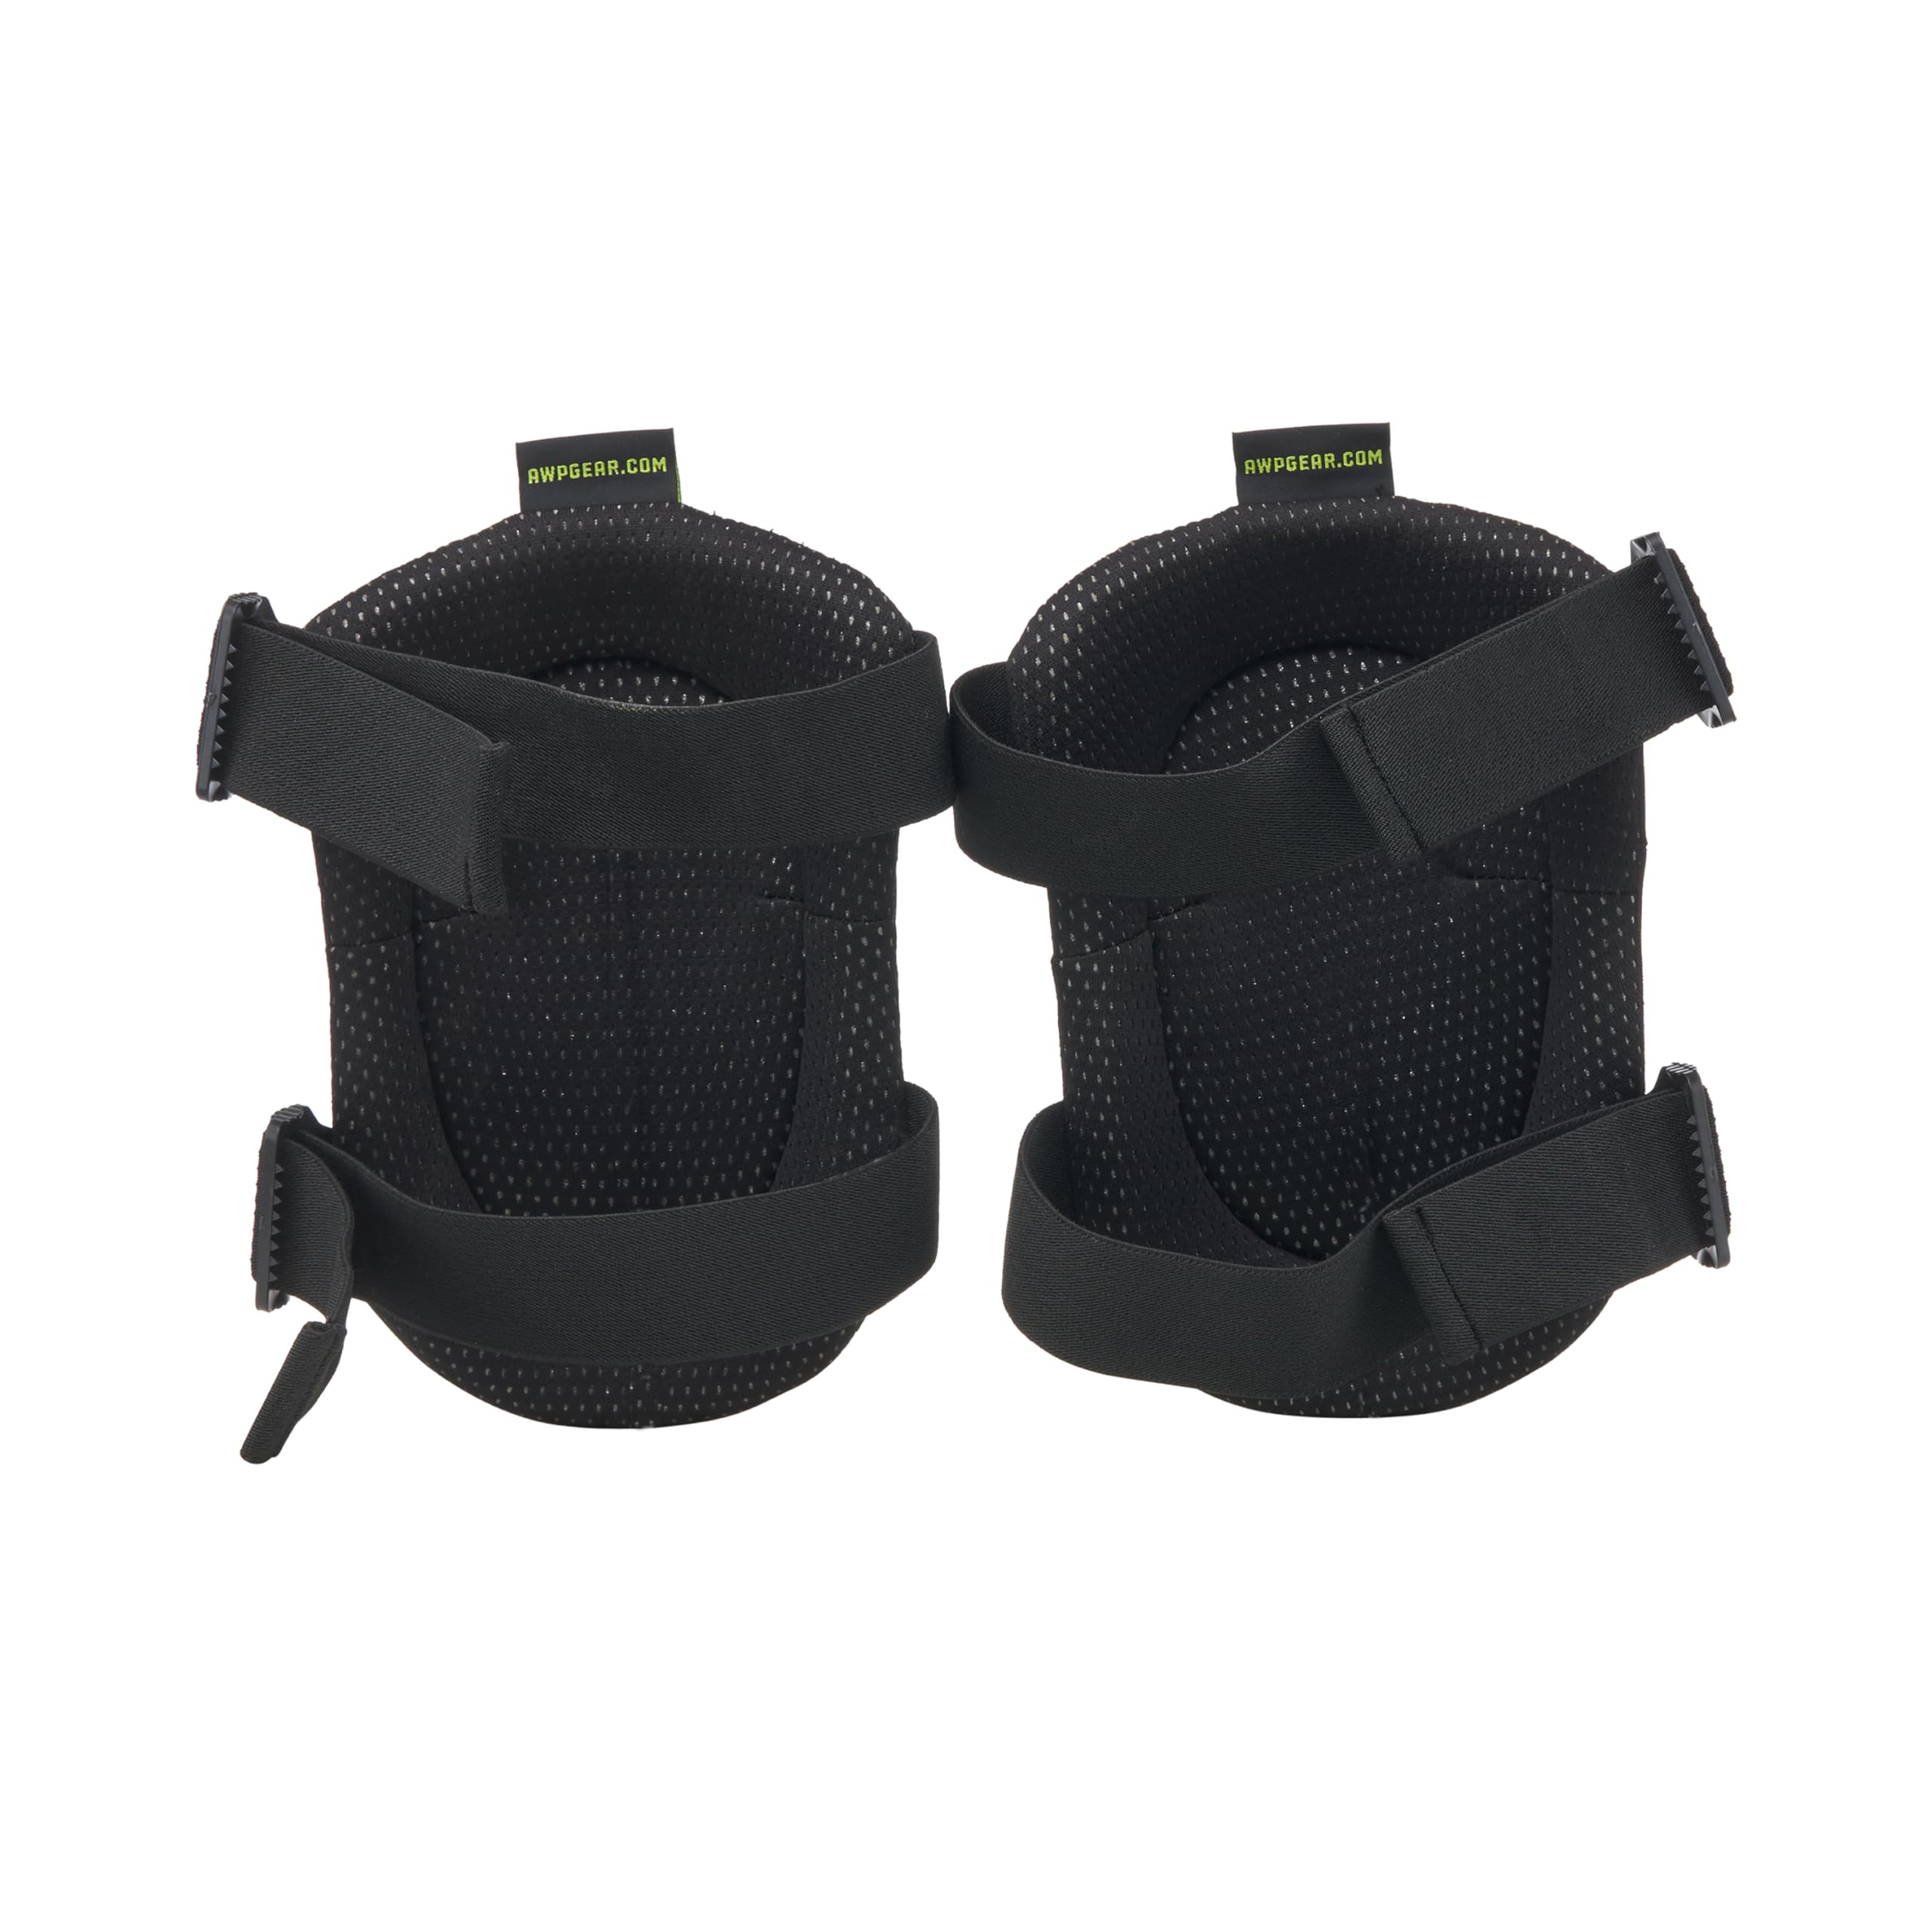 AWP Tactical Hard Cap Knee Pads | High Density Foam Padded Work Knee Pads | One Size